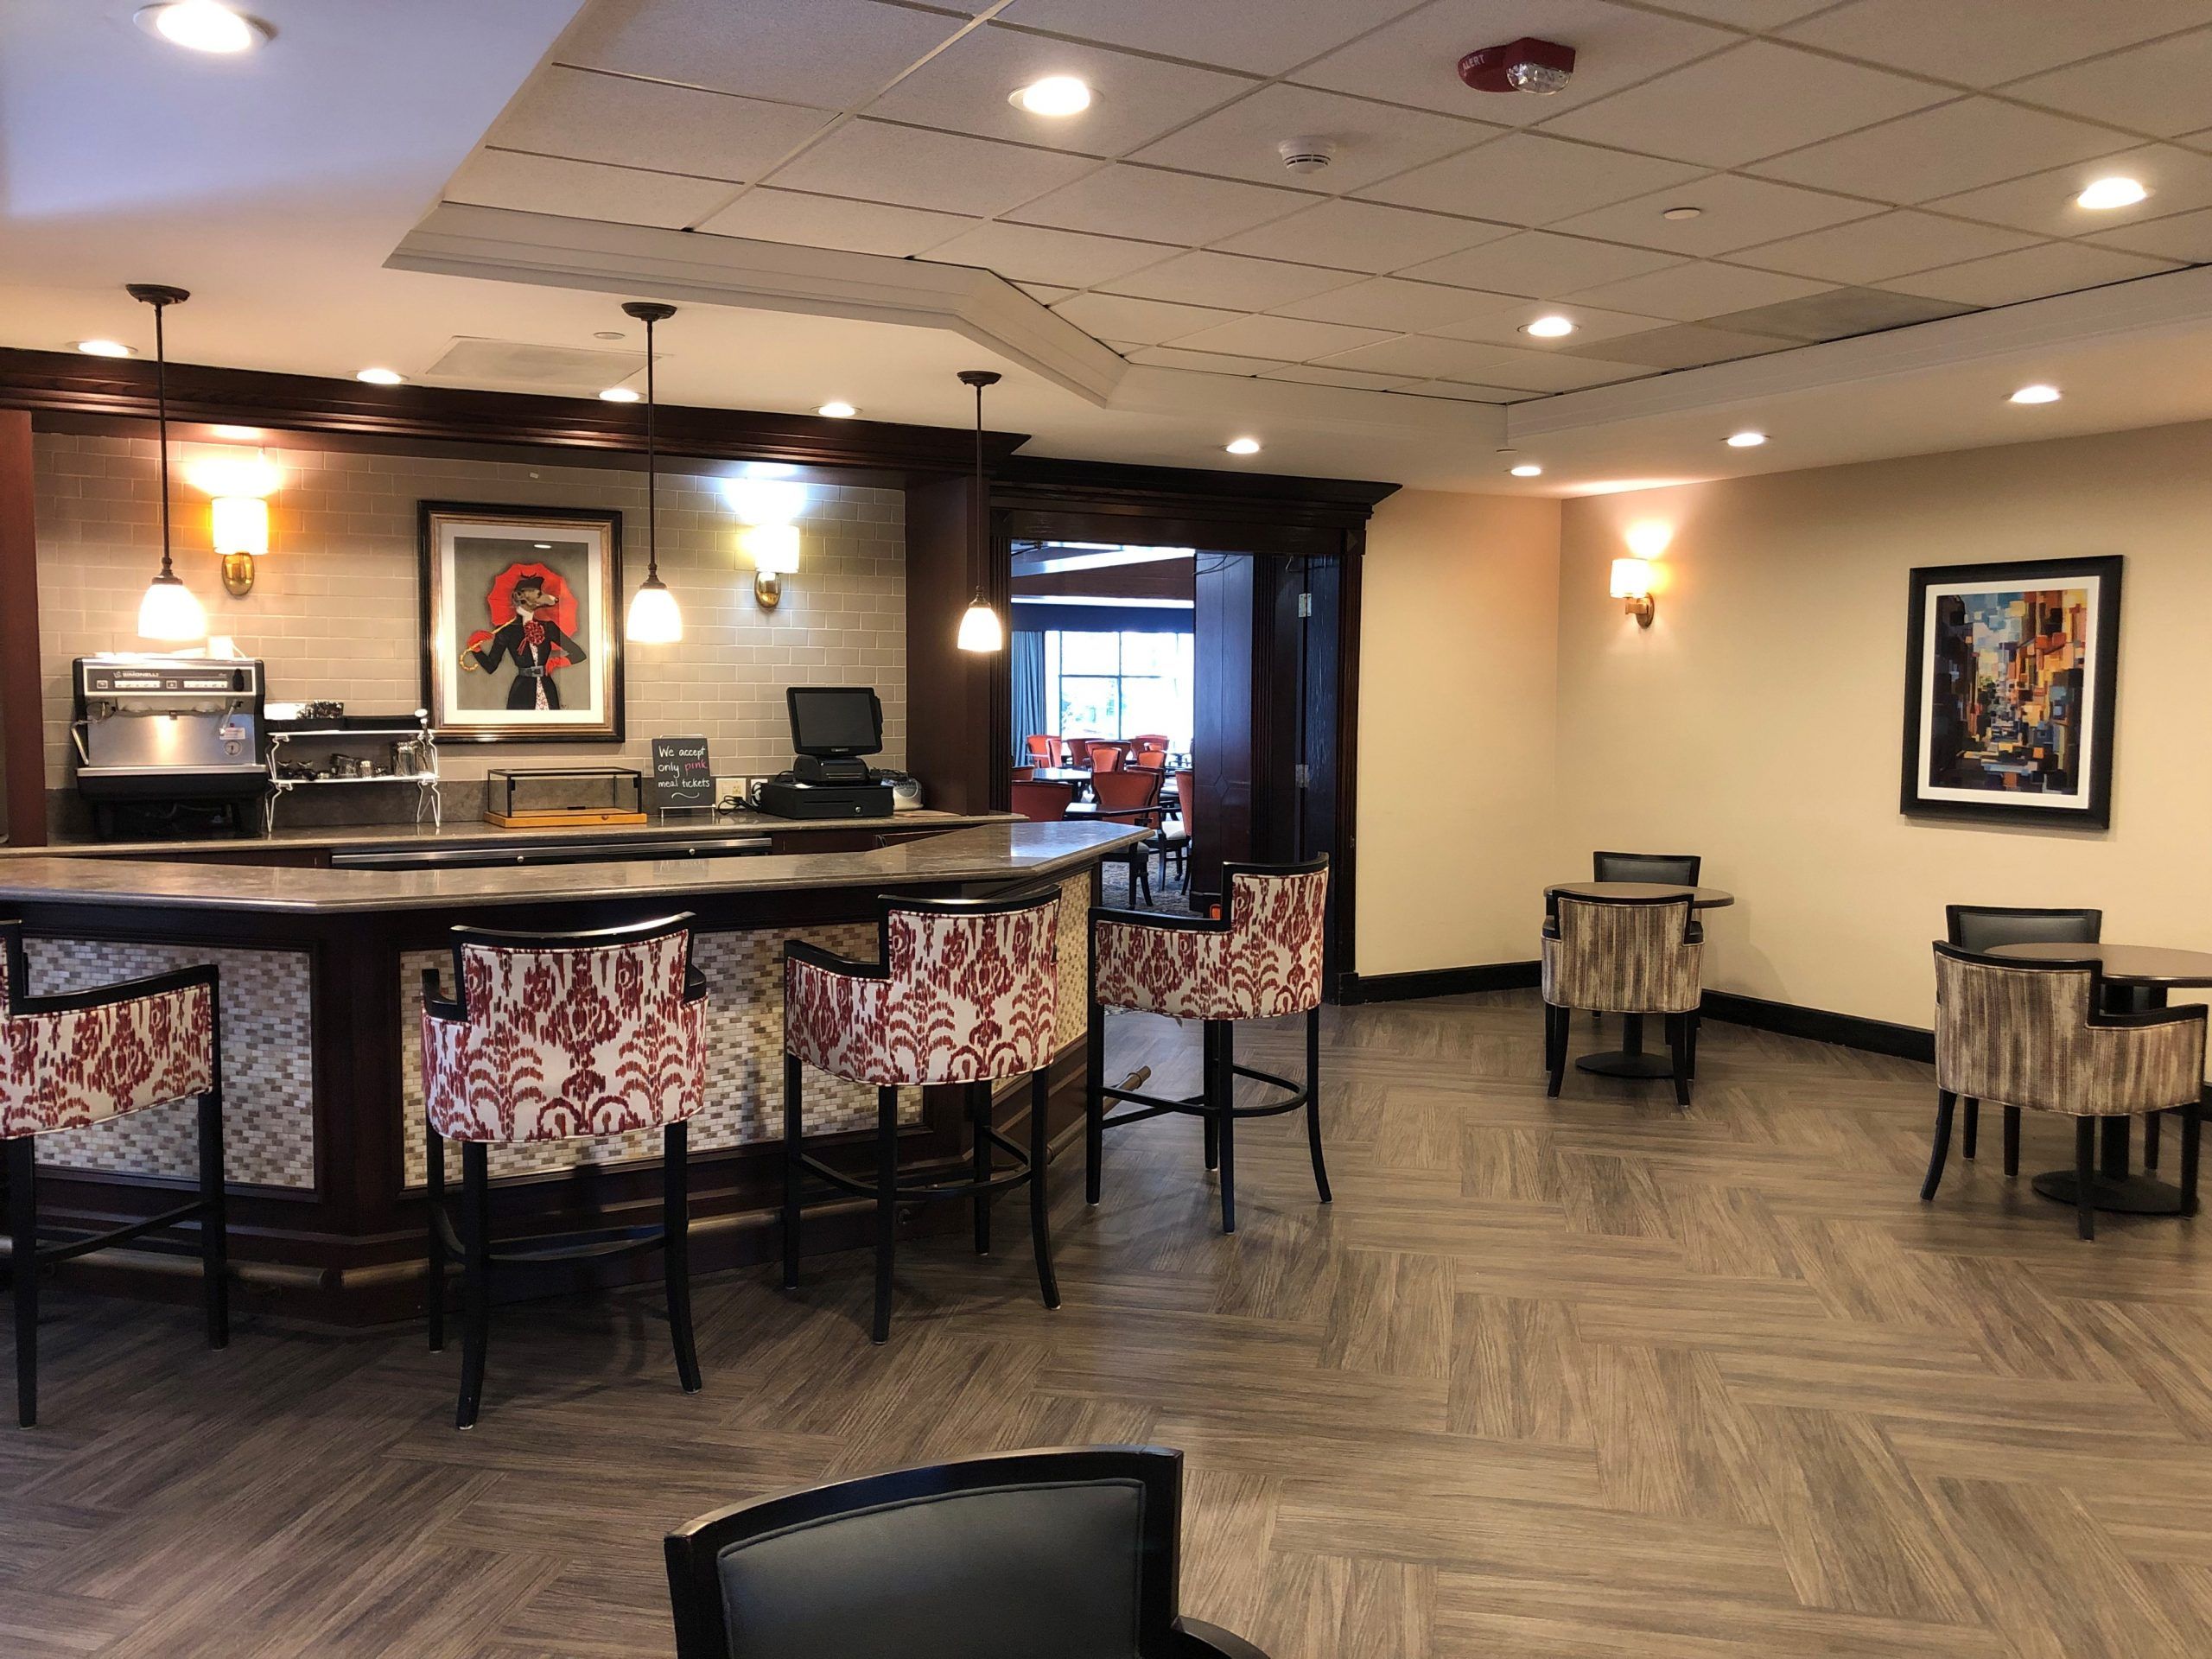 Senior living community lounge at Lincolnwood Place with art, furniture, and computer station.